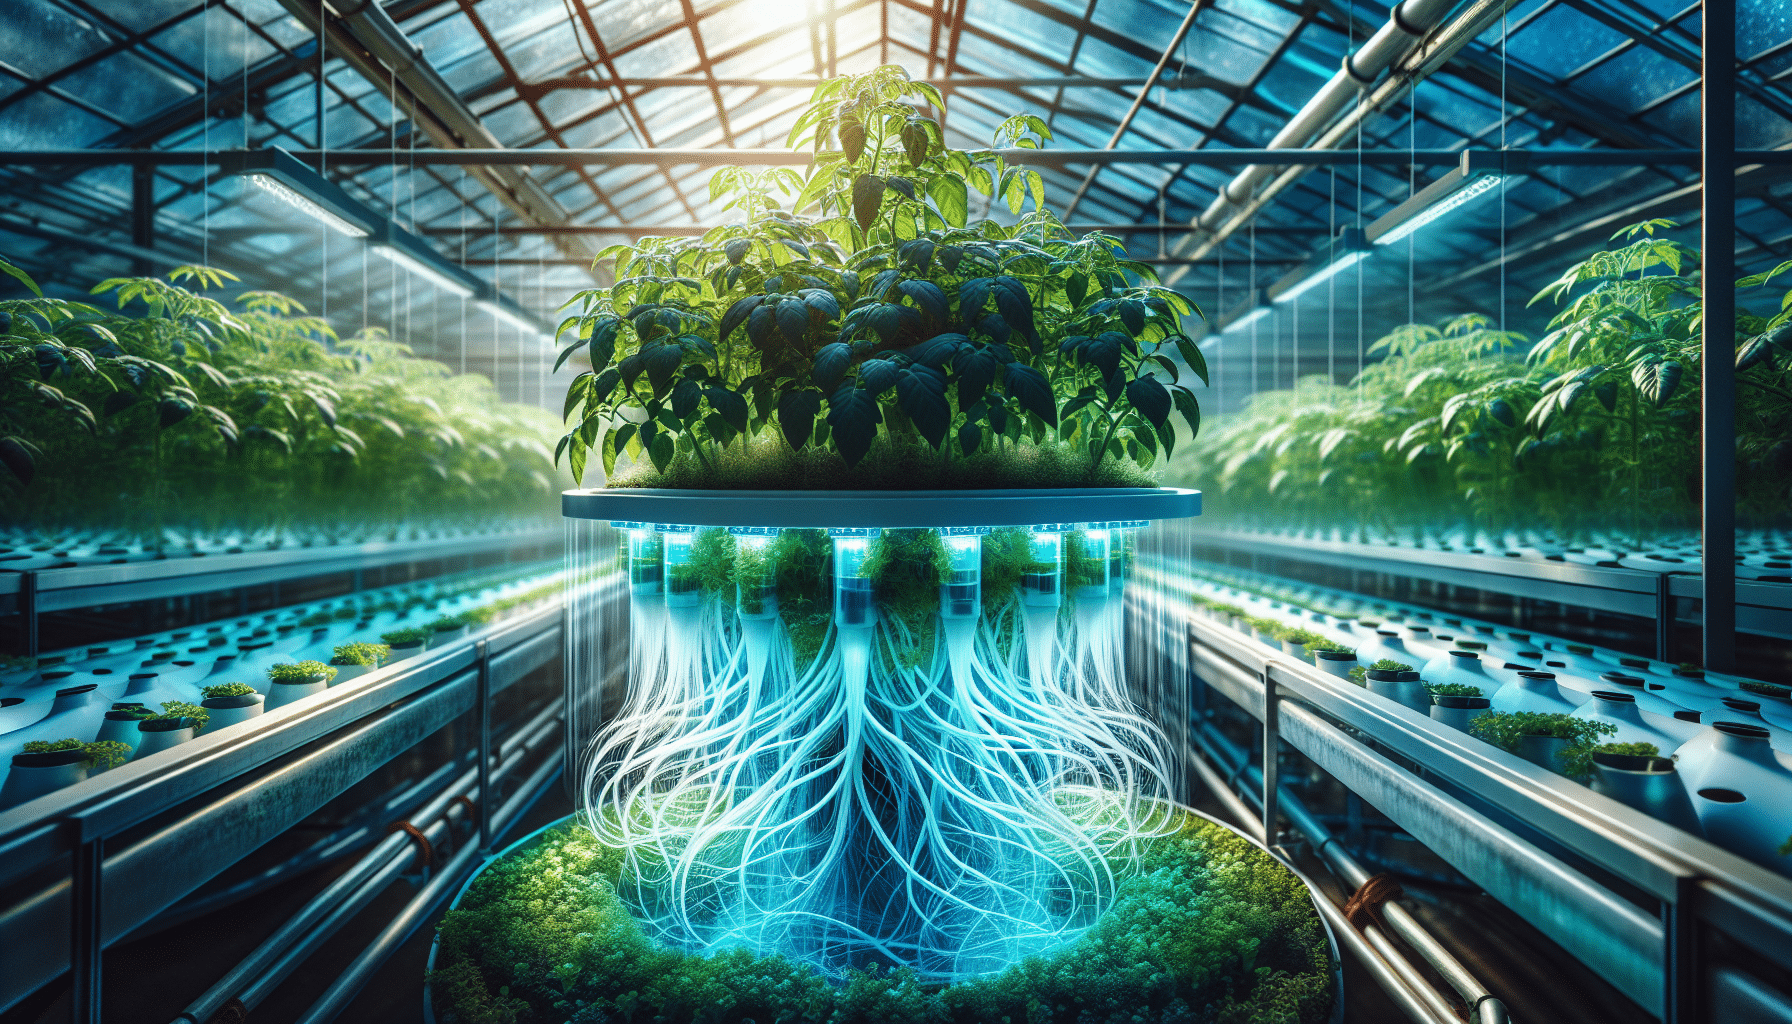 Hydroponic system with nutrient-rich solutions